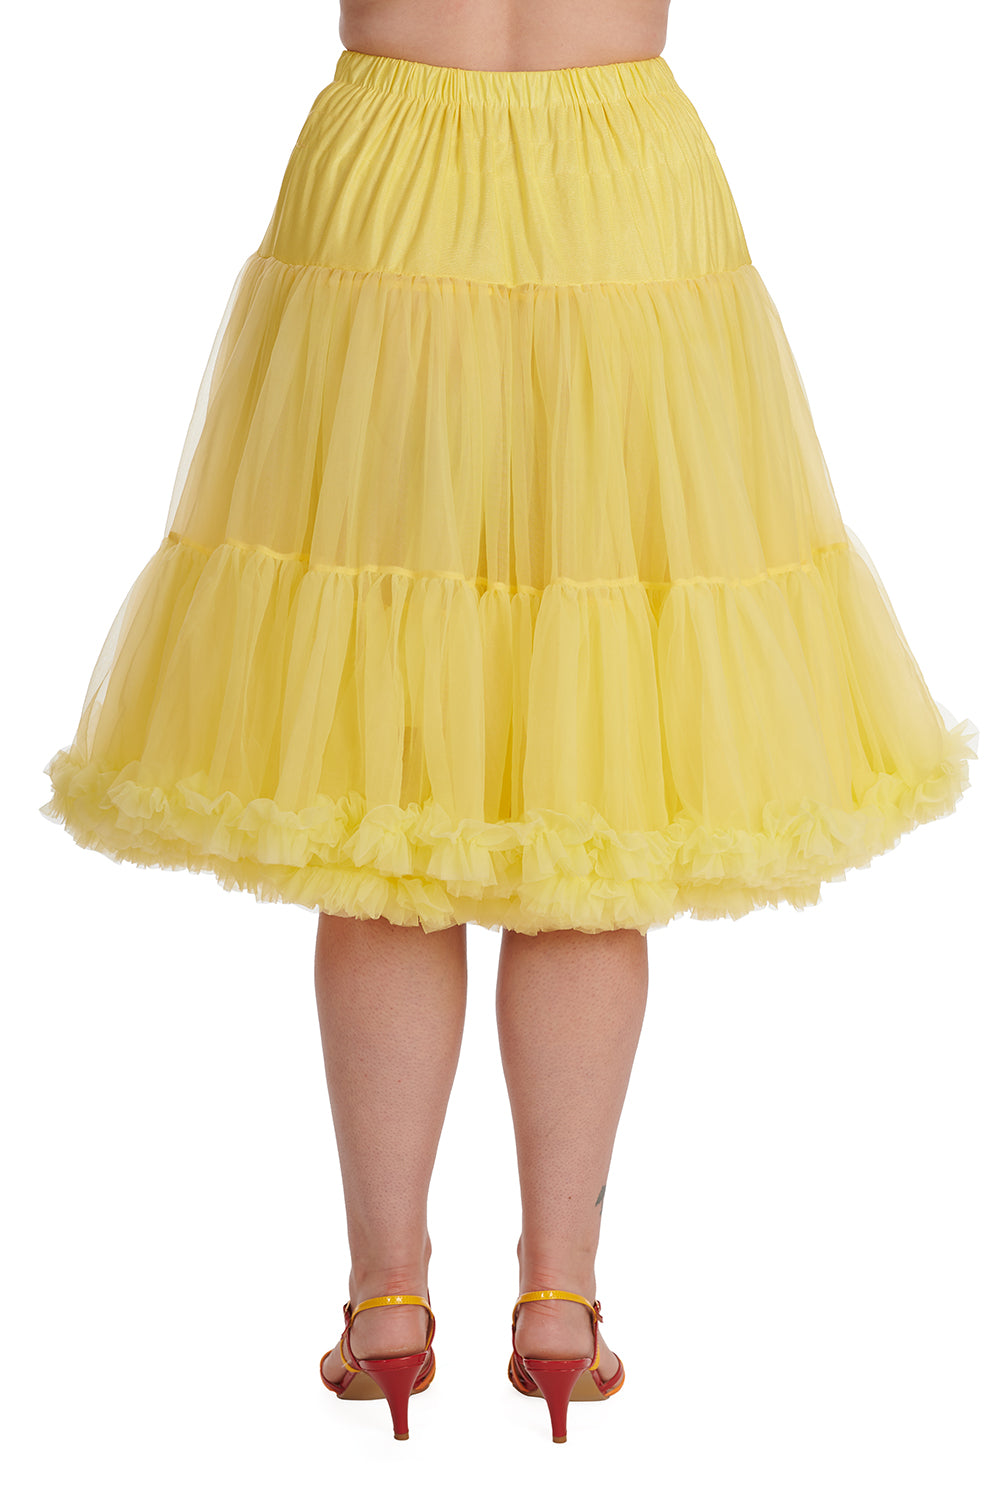 Back view of model wearing rainbow strappy sandals and a bright yellow Lifeforms Petticoat by Banned Retro